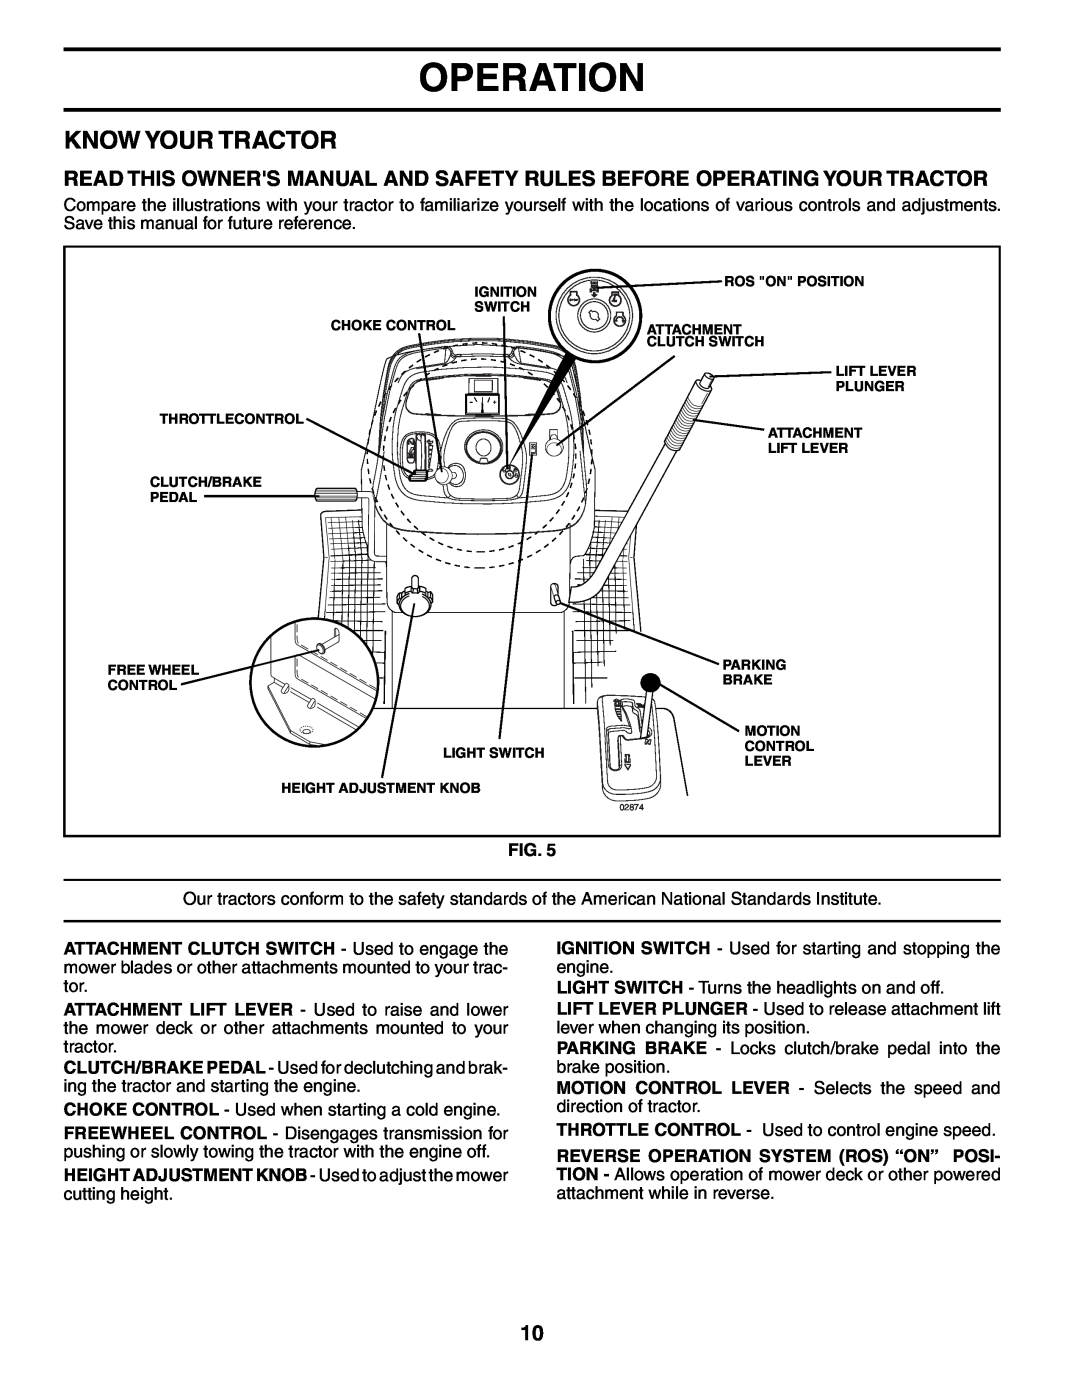 Poulan DB24H42YT manual Know Your Tractor, Operation 